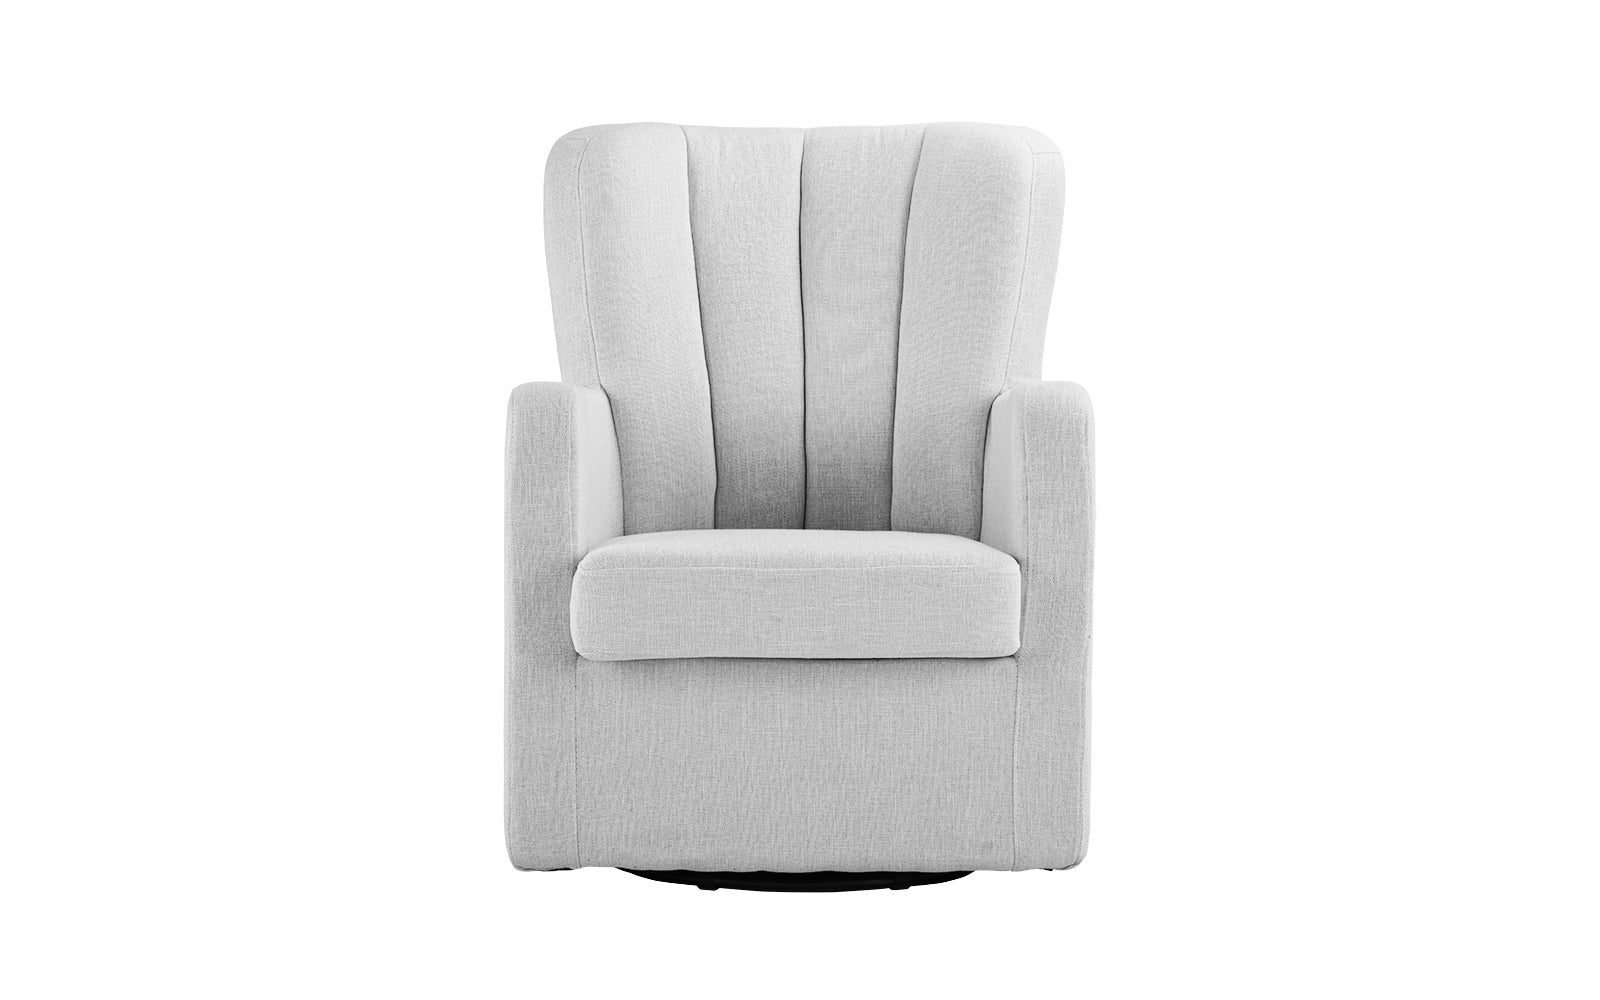 ARM51-FB-WH Michelle Atomic Shell-Style Linen Swivel Chair sku ARM51-FB-WH